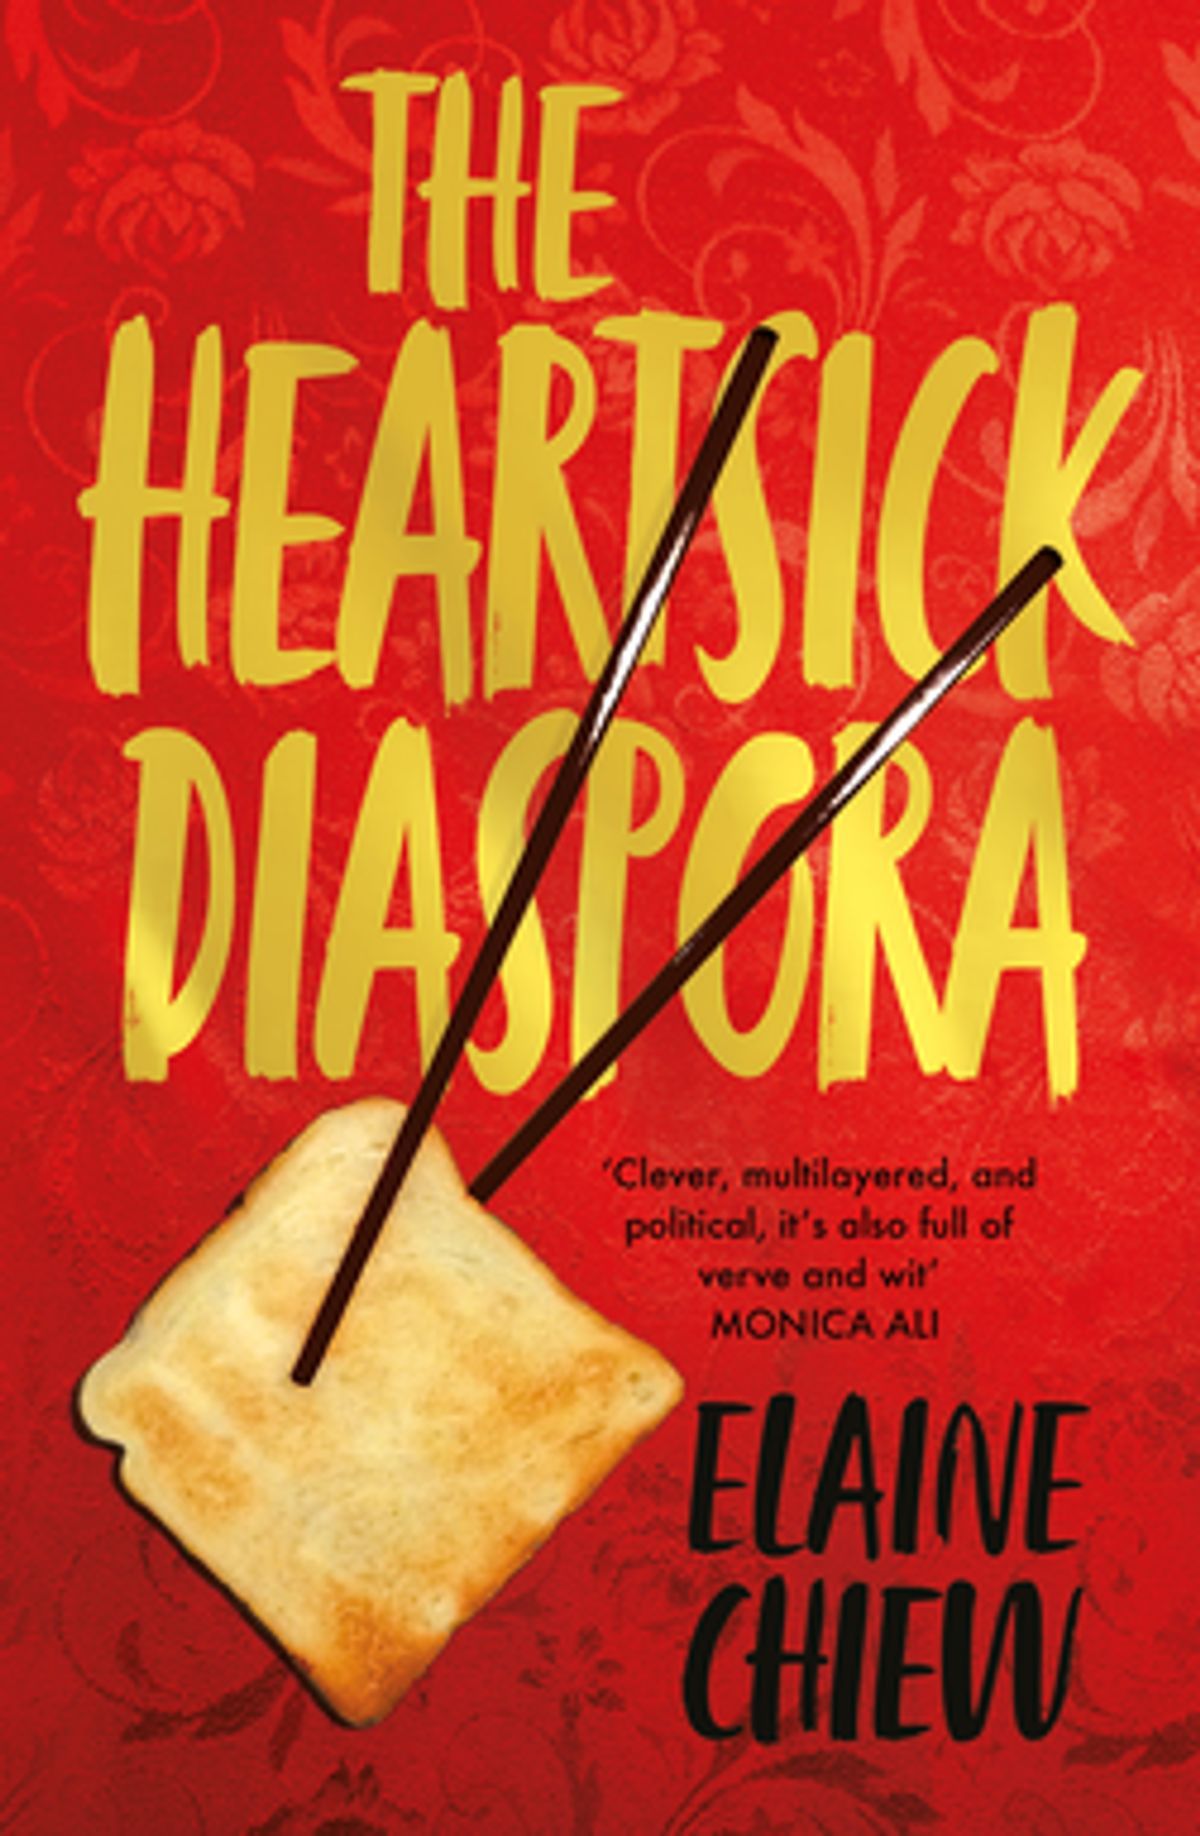 The Heartsick Diaspora and Other Stories